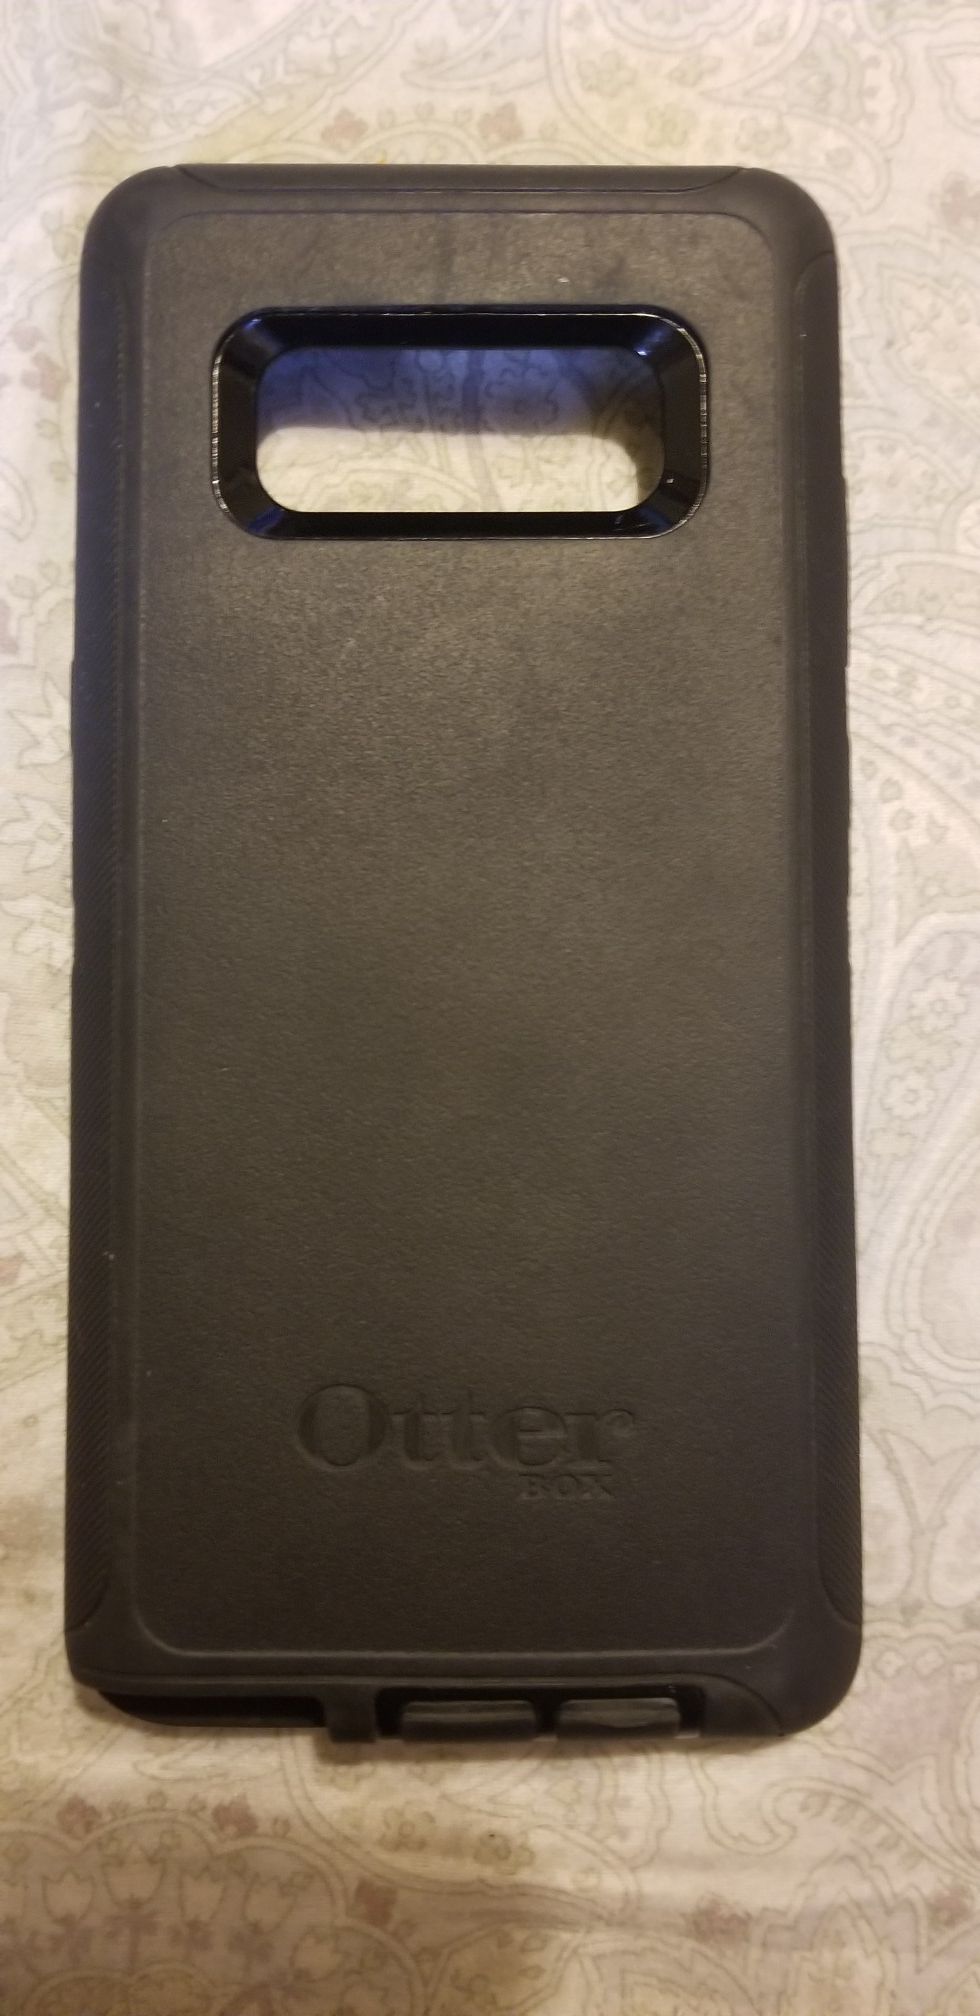 OTTERBOX FOR NOTE 5 SAMSUNG GALAXY